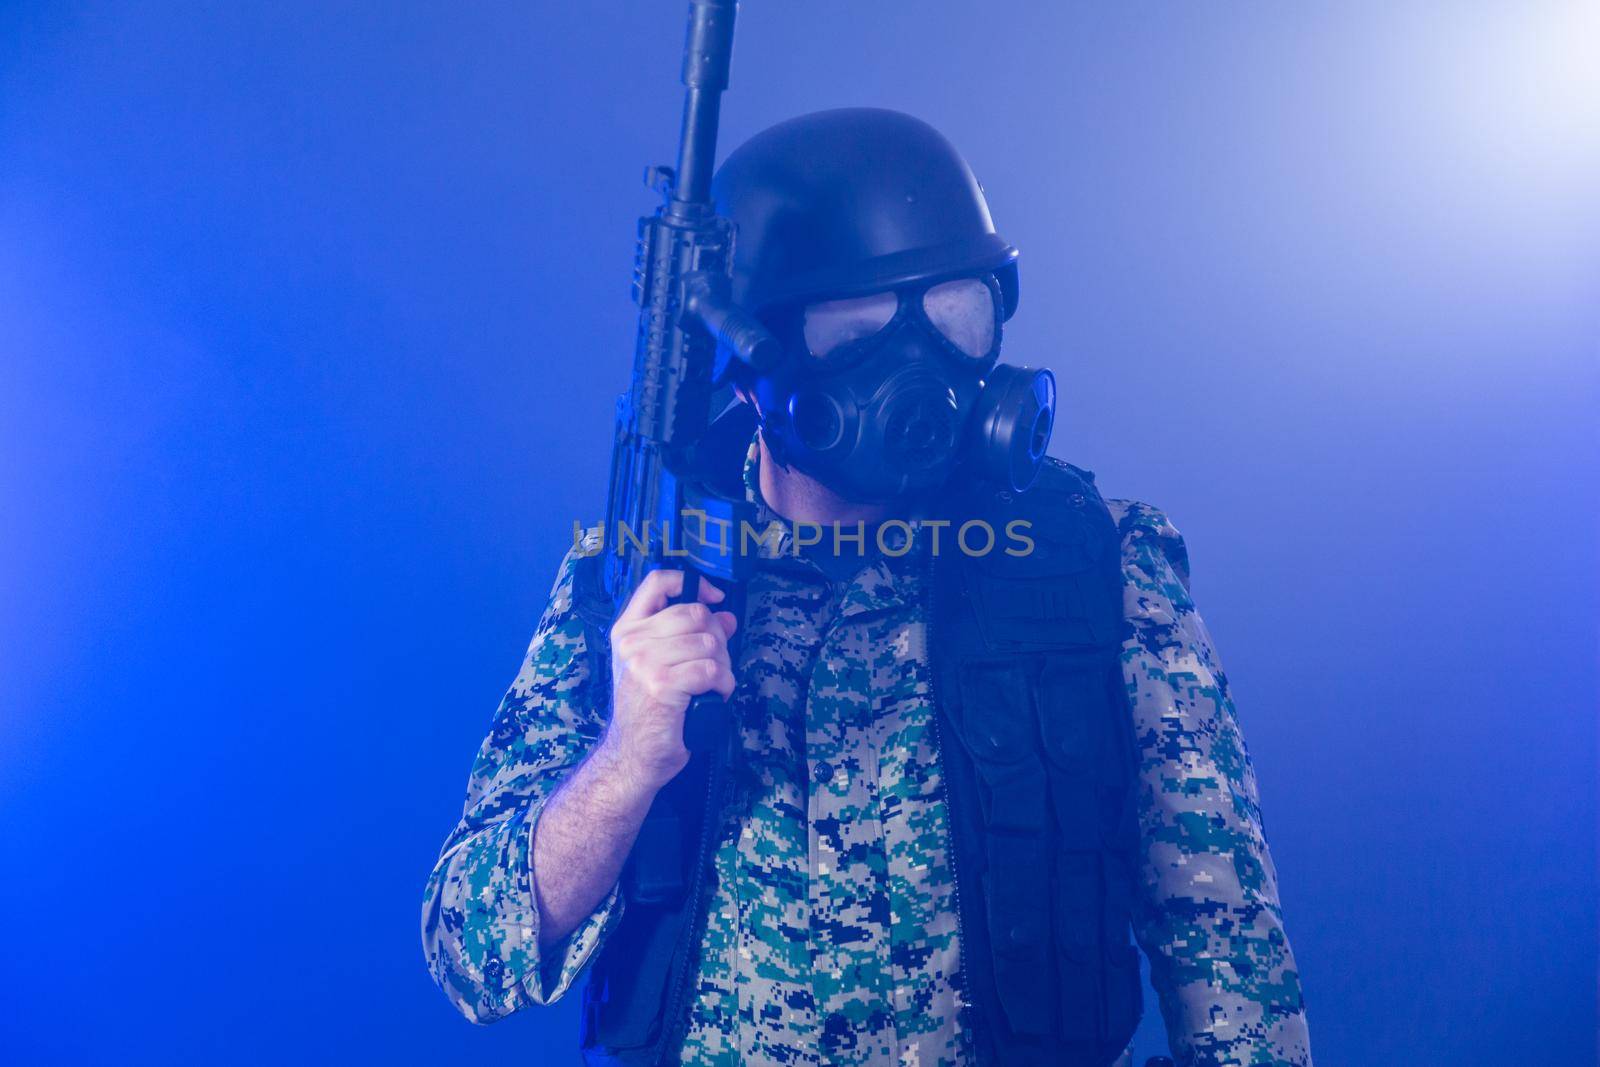 Soldier holding assault rifle in smoky haze by imagesbykenny